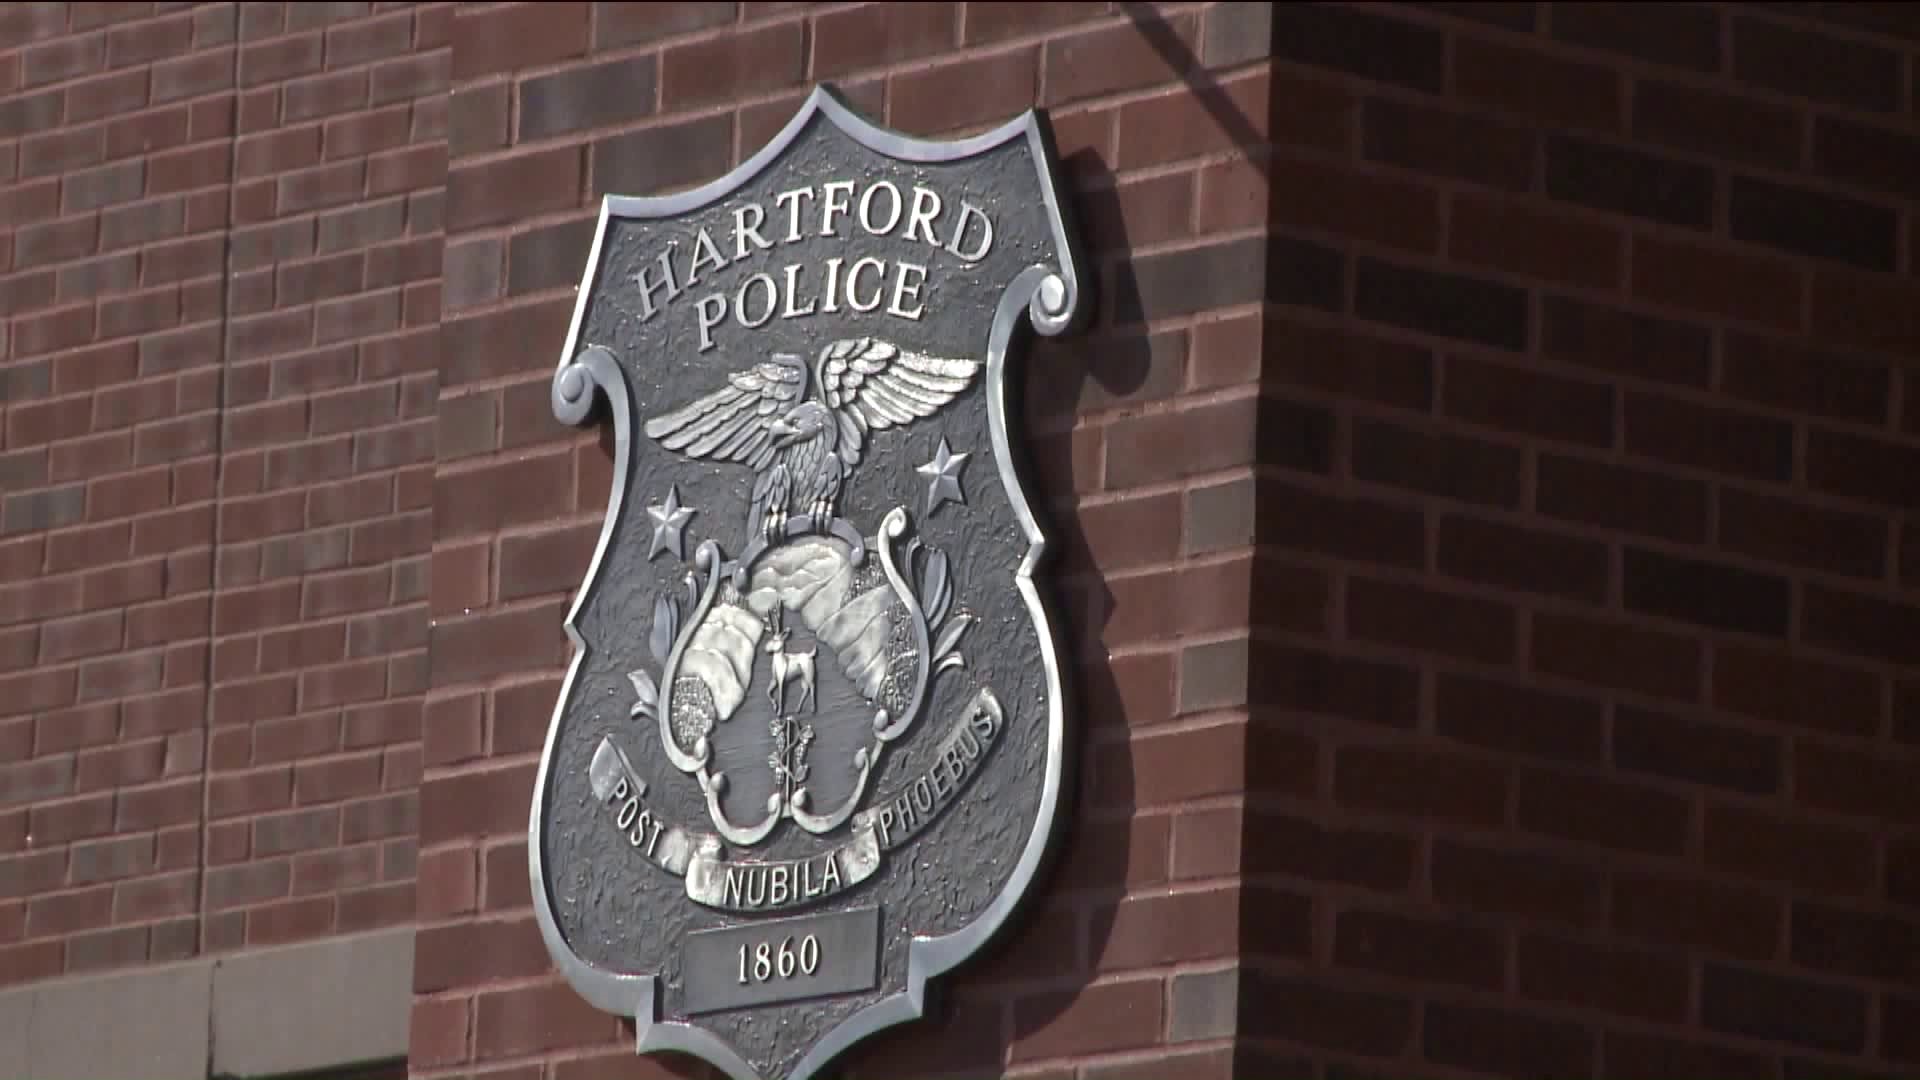 Hartford police officer accuses supervisor of sexual harassment